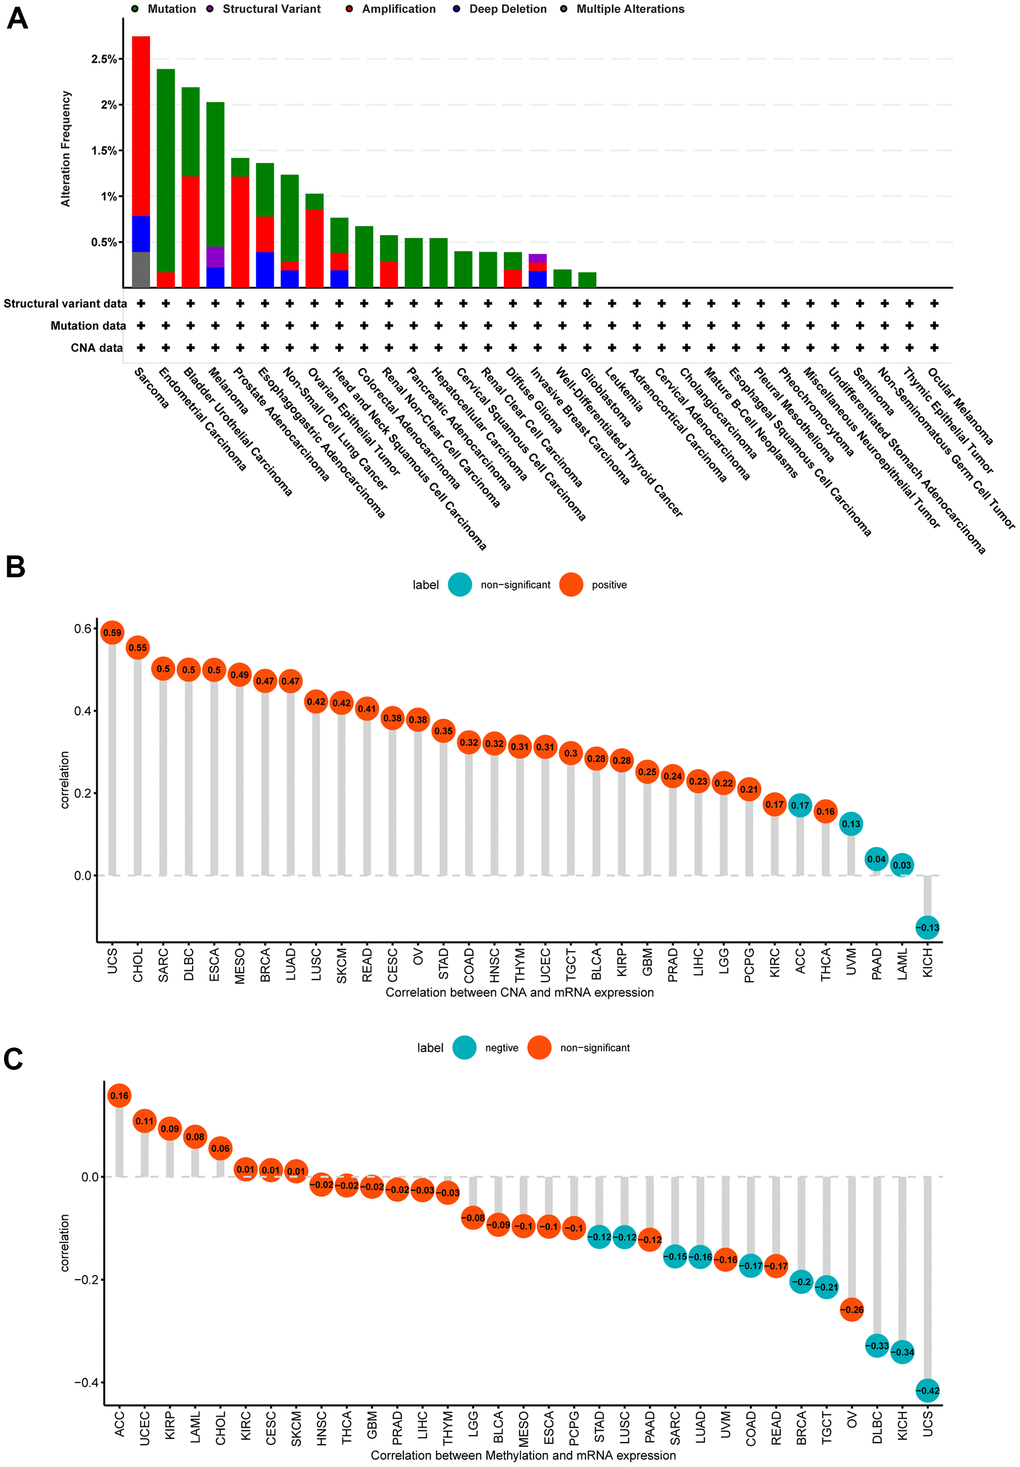 Gene alteration of NUP37. (A) The gene alteration of NUP37 in TCGA pan-cancer using cBioportal database. (B) The correlation between NUP37 expression and CNA. (C) The correlation between NUP37 expression and DNA methylation.